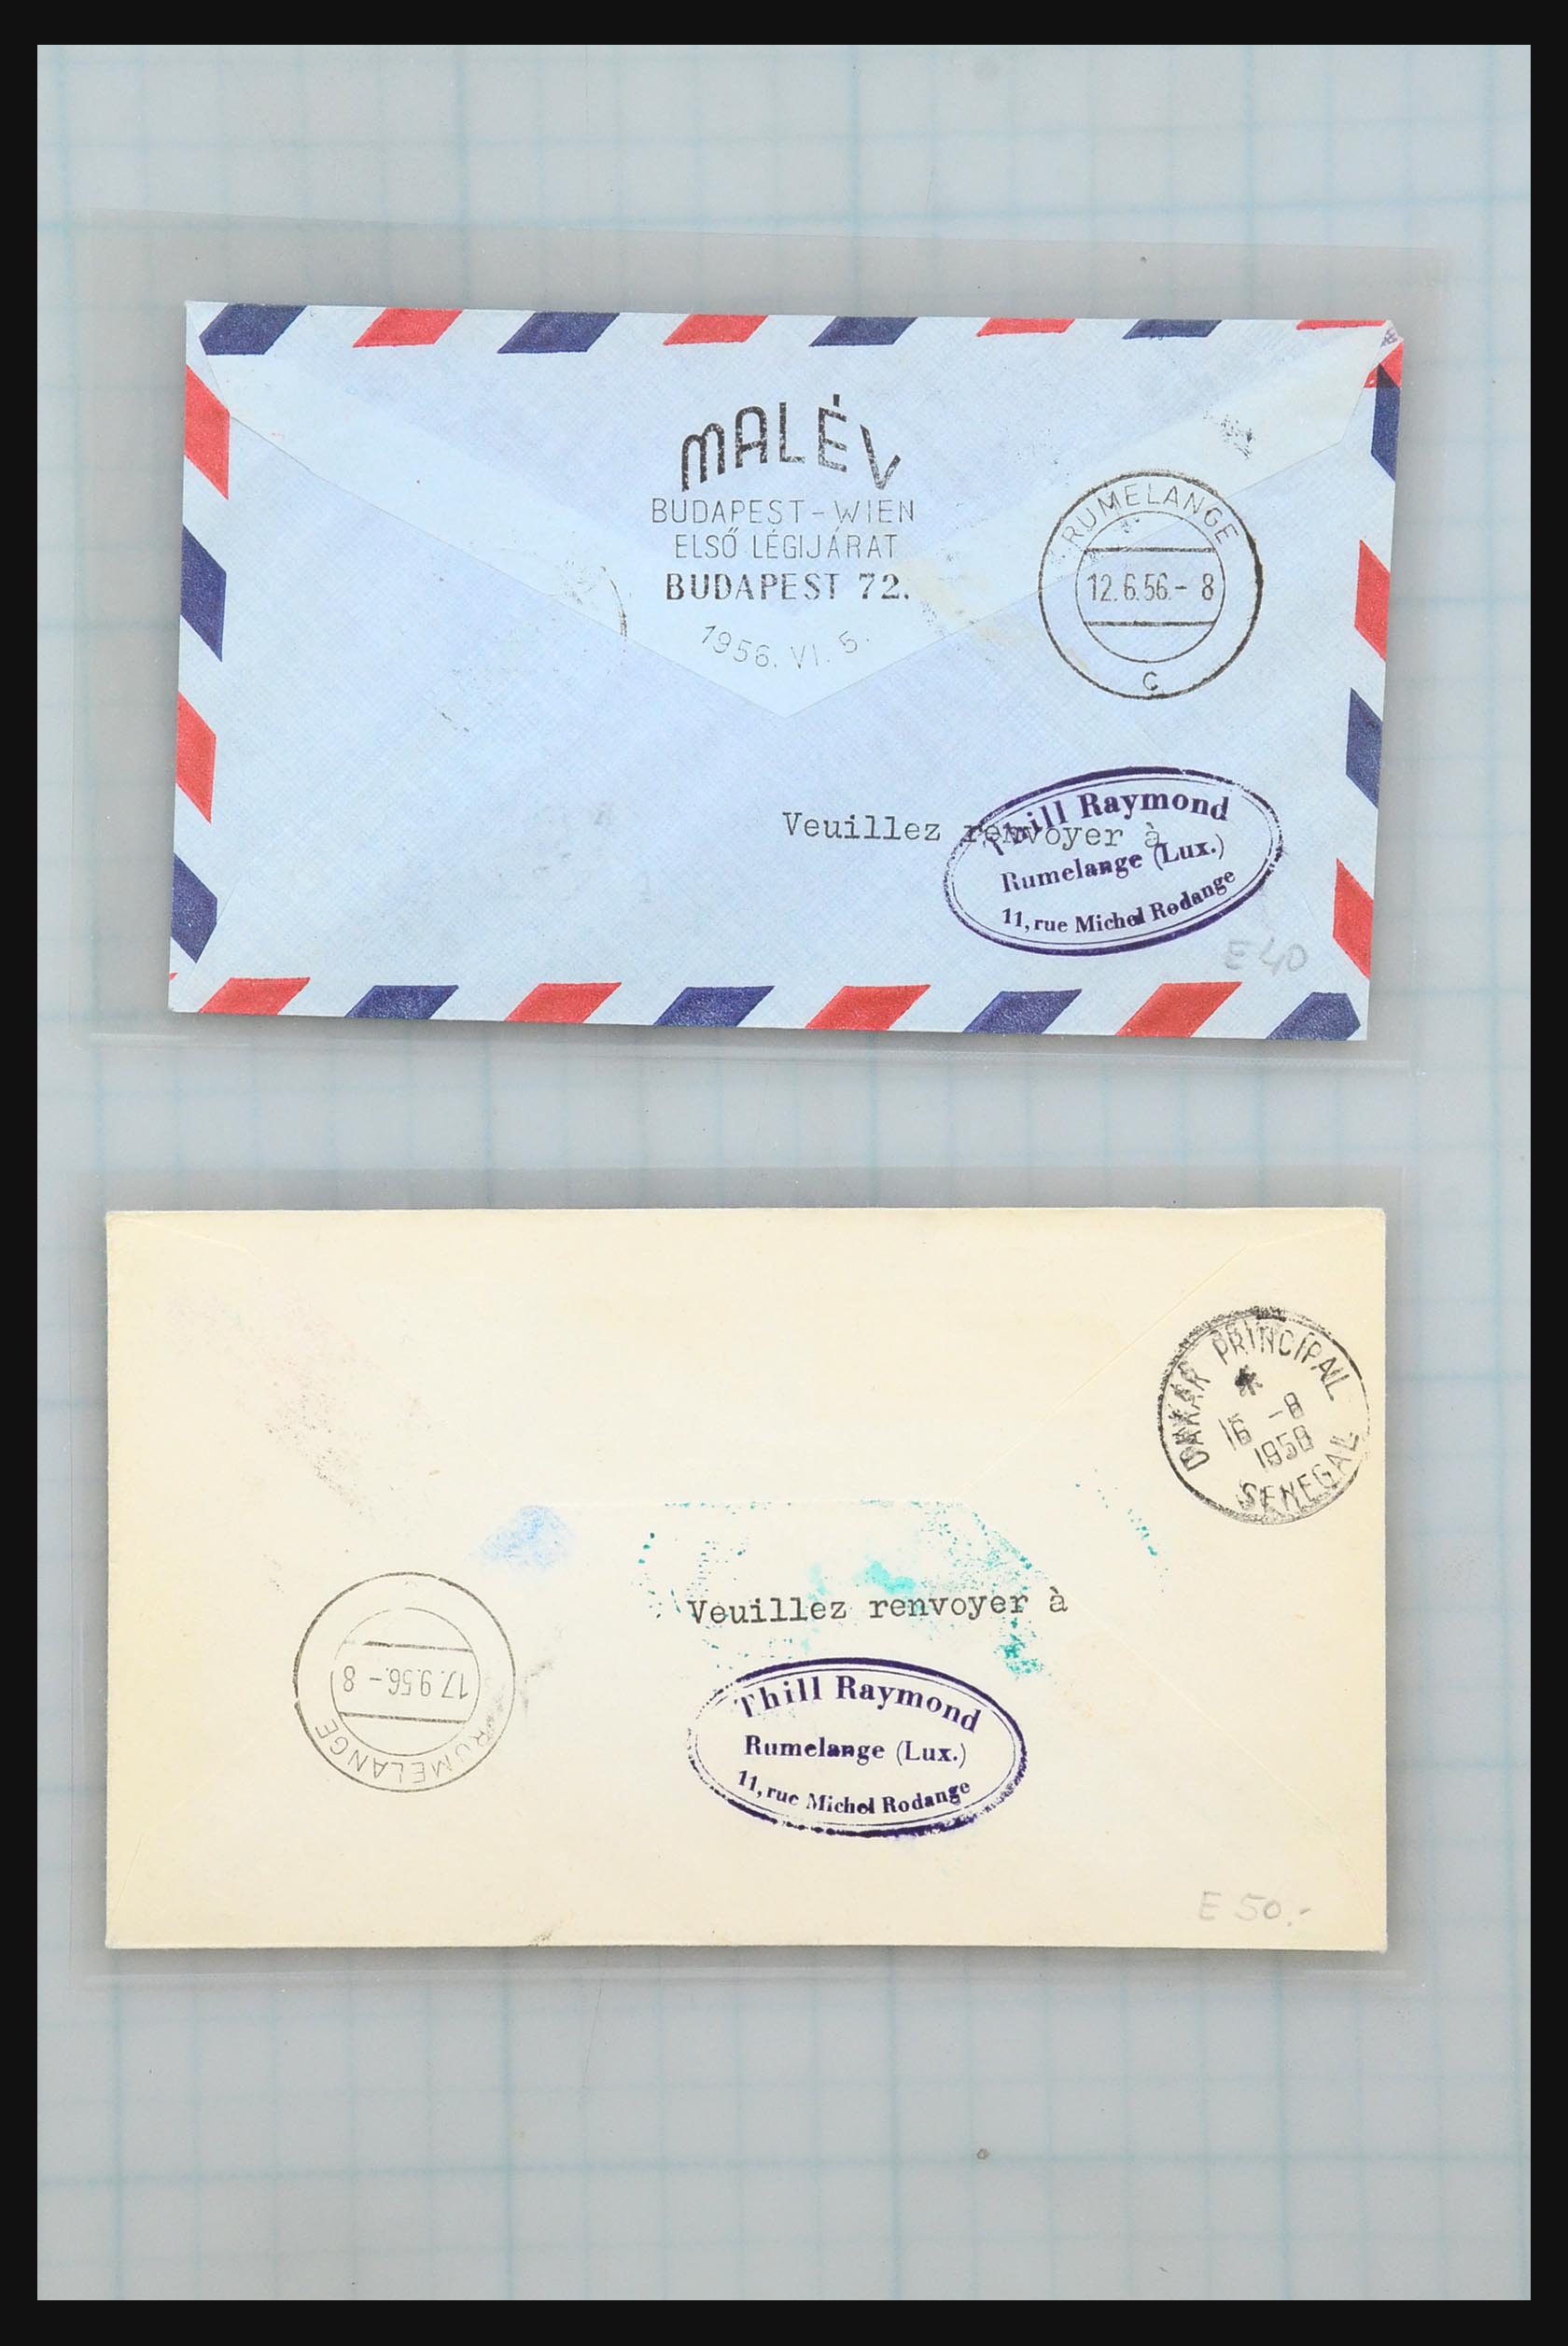 31358 076 - 31358 Portugal/Luxemburg/Greece covers 1880-1960.